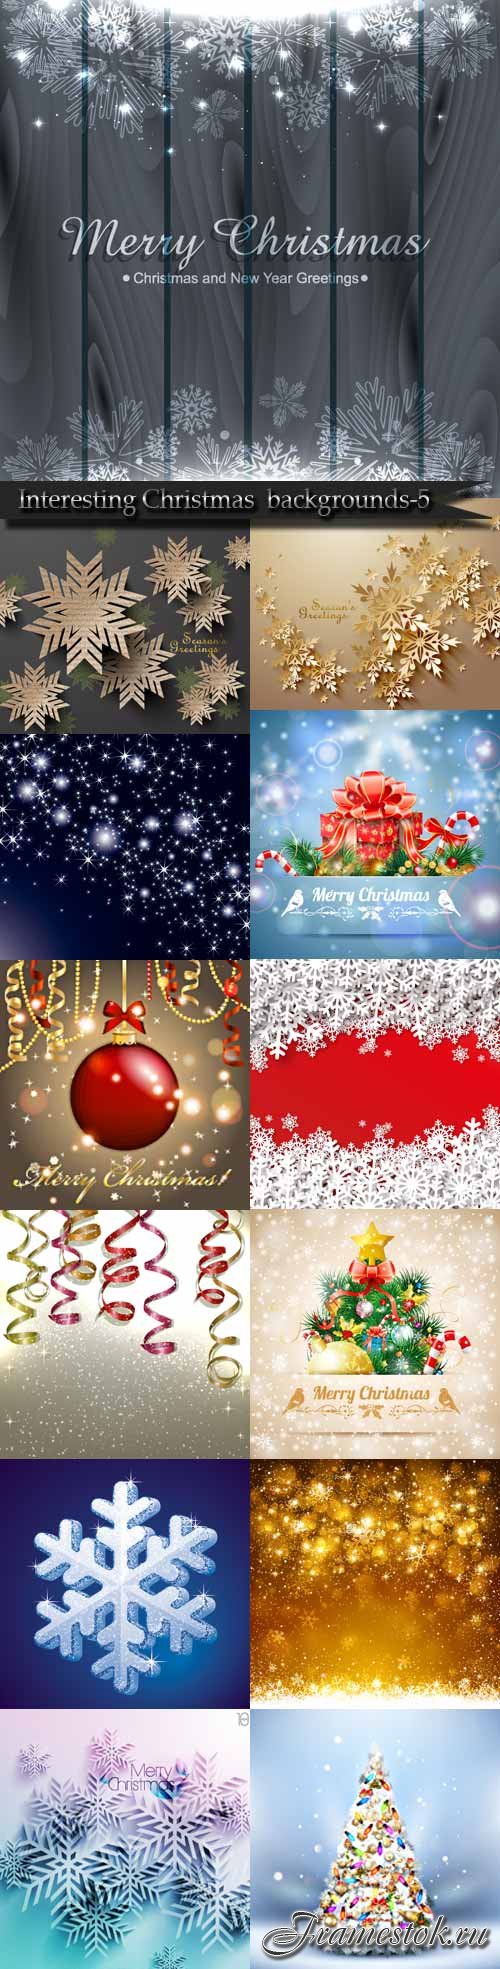 Interesting Christmas vector backgrounds-5